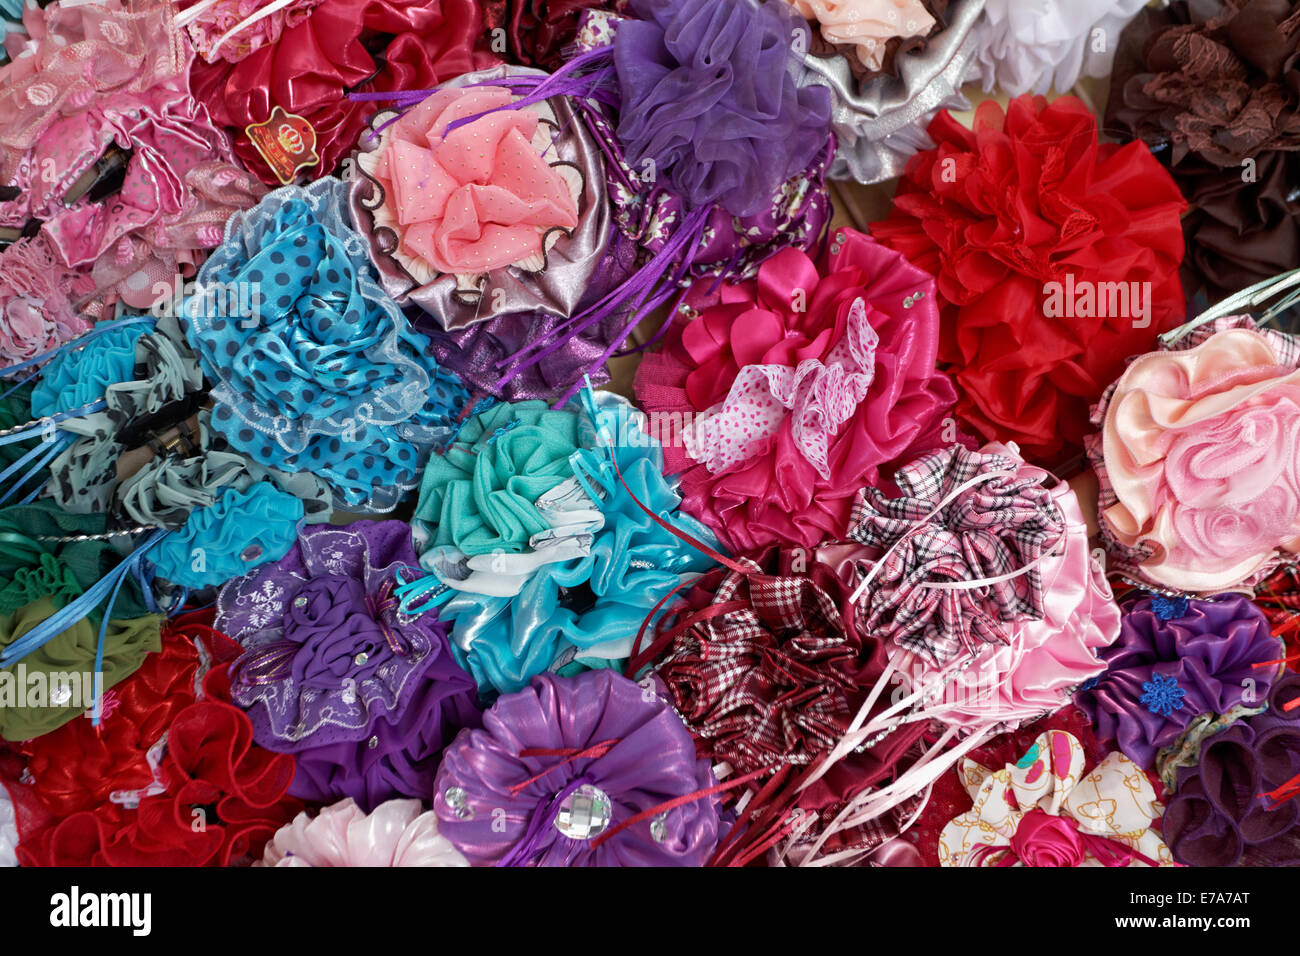 Colourful hair clips in a shop in the Muttrah Souq market, Muttrah, Muscat, Oman Stock Photo